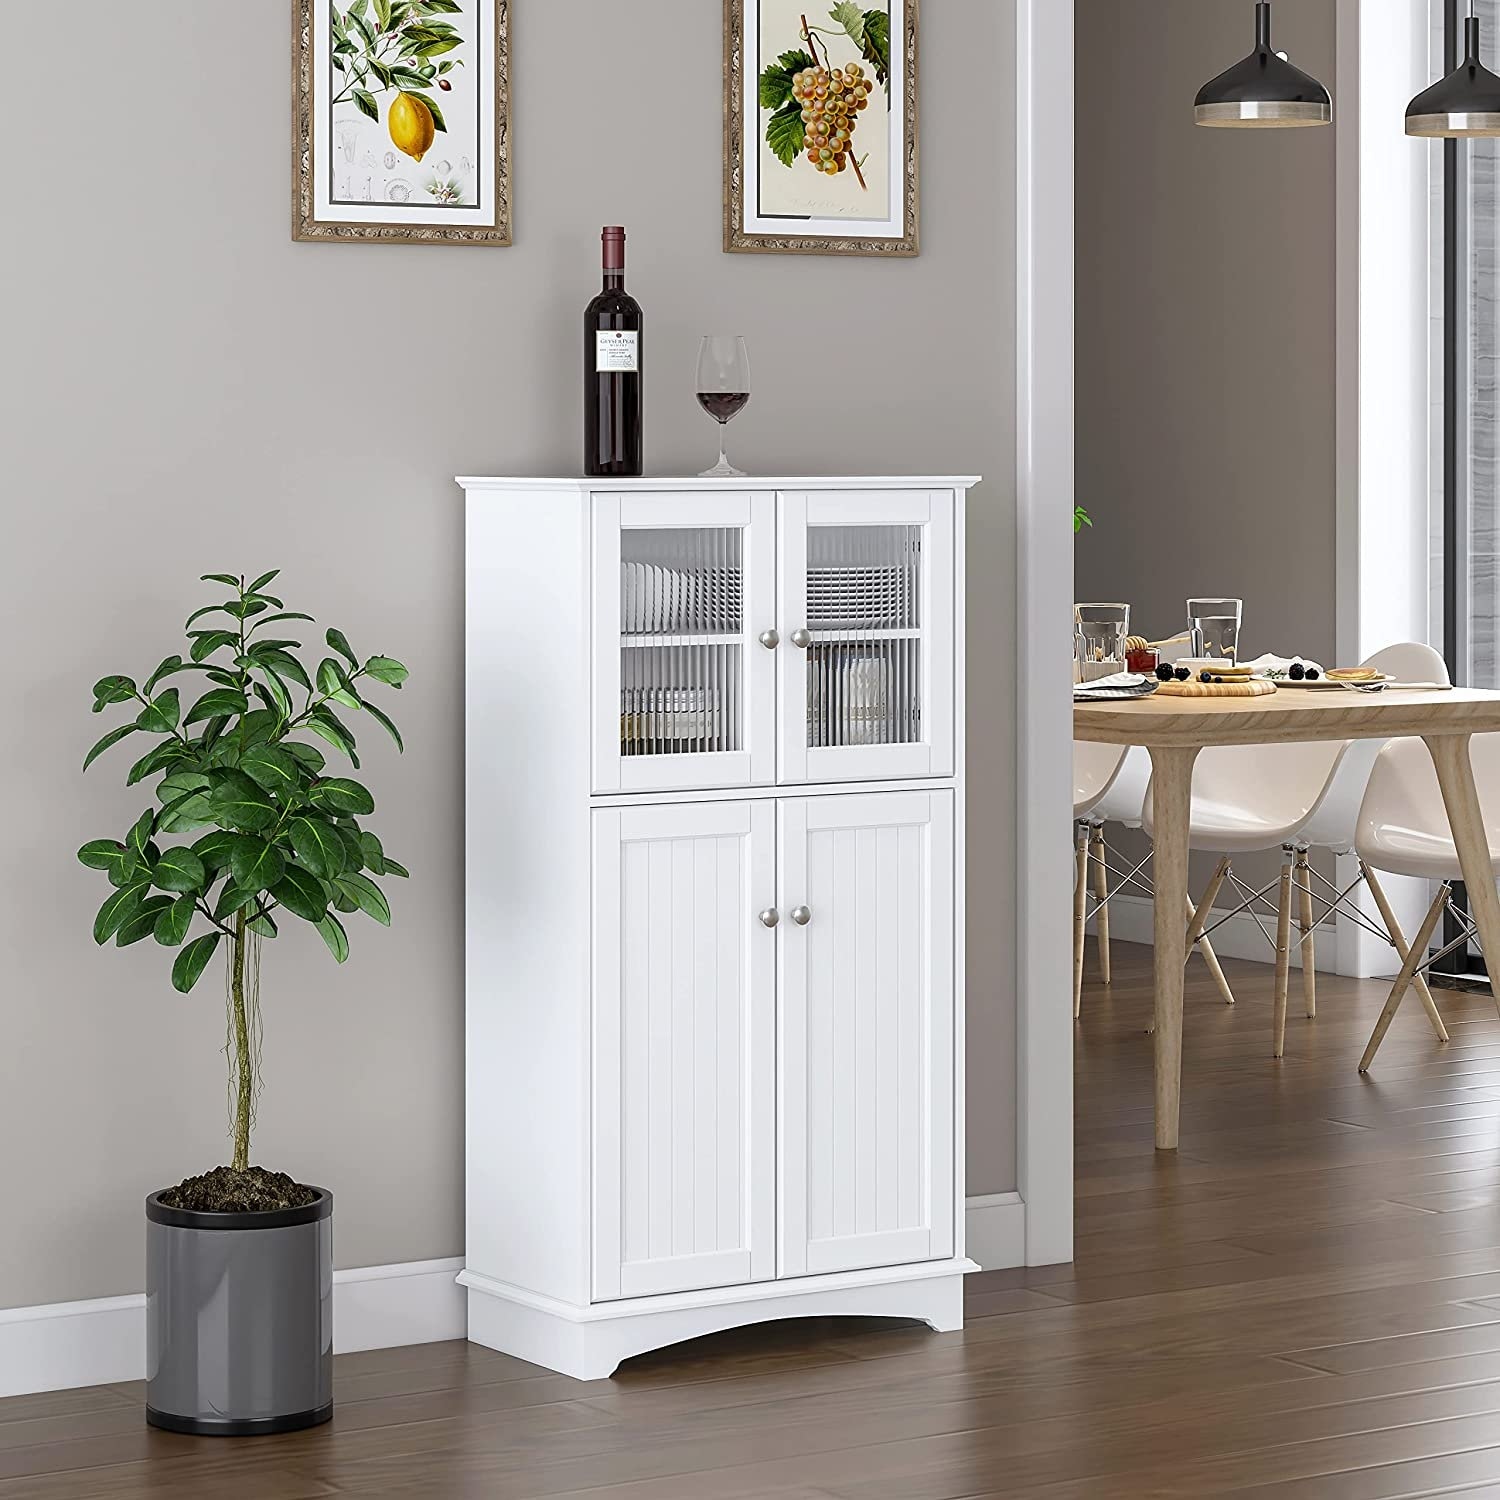 Spirich Home Tall Corner Cabinet with Two Doors and Three Tier Shelves,  Free Standing Corner Storage Cabinet for Bathroom, Kitchen, Living Room or